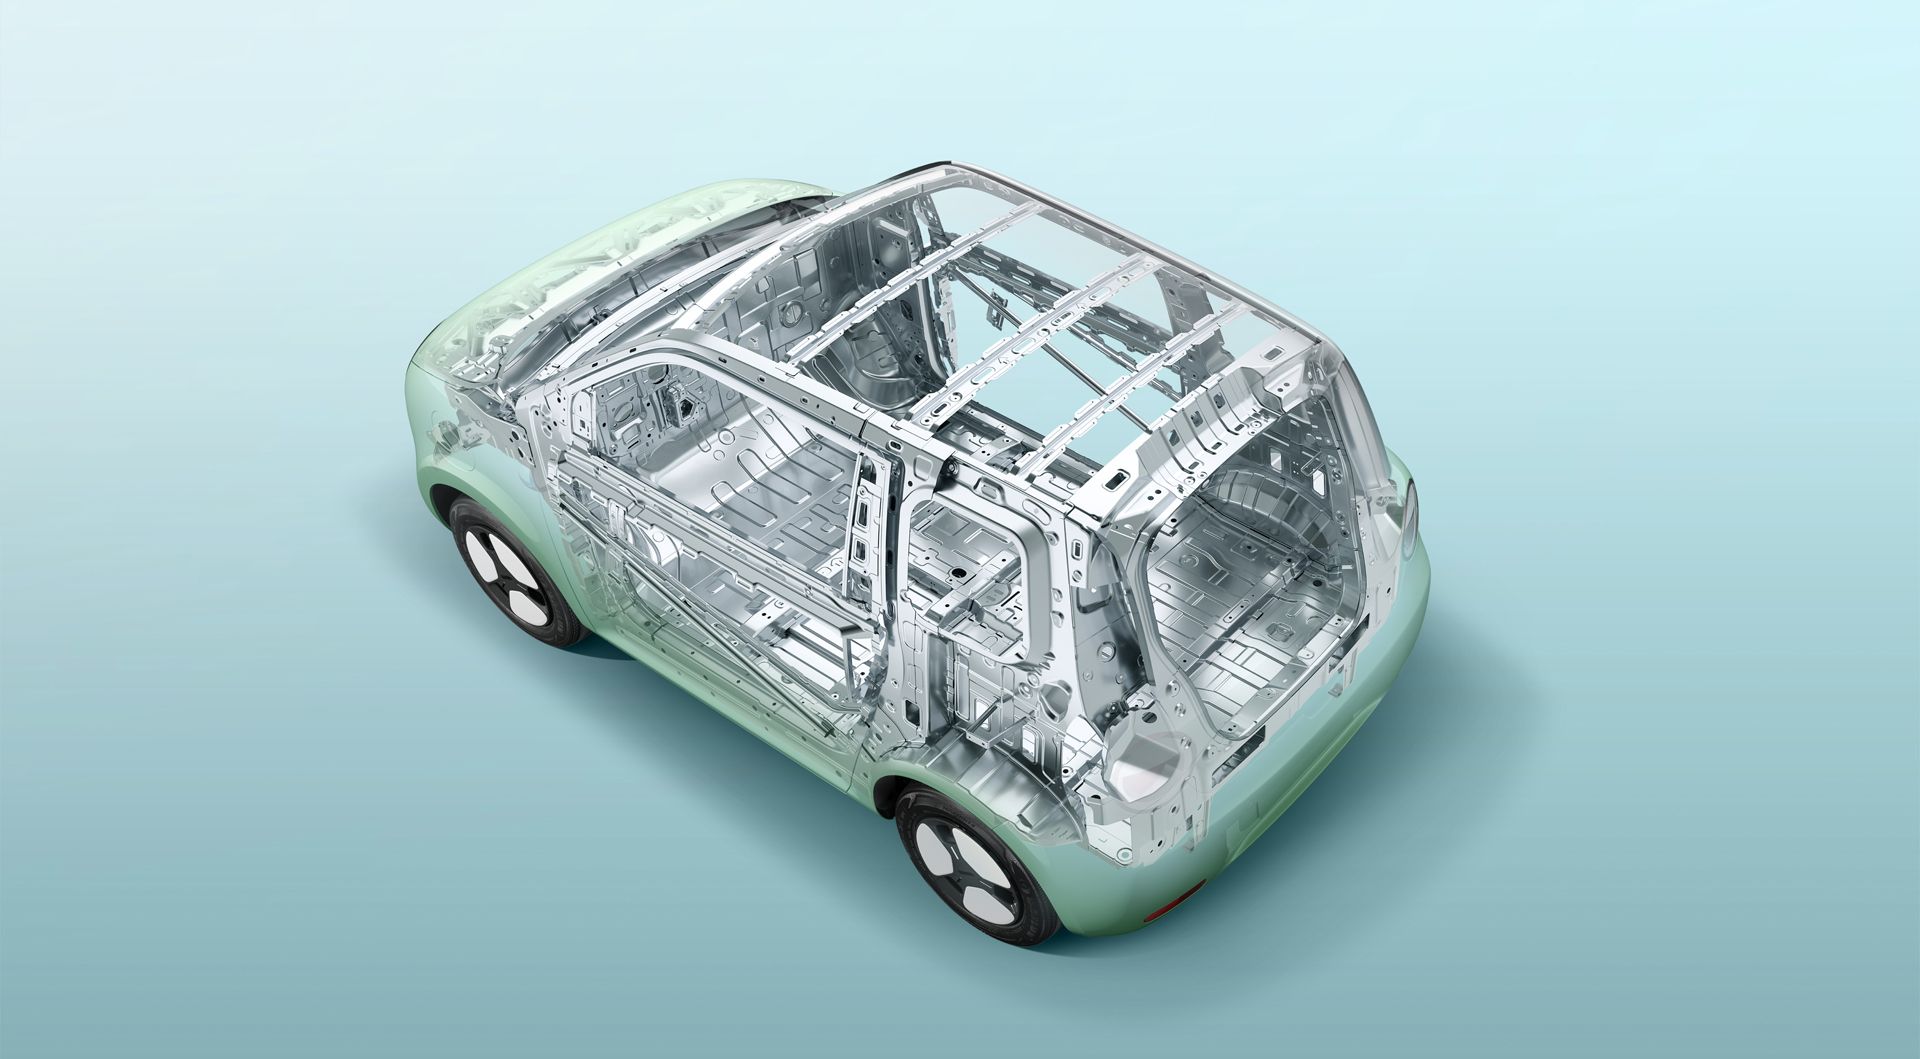 EPA 0 Platform is specifically developed for electric vehicles.